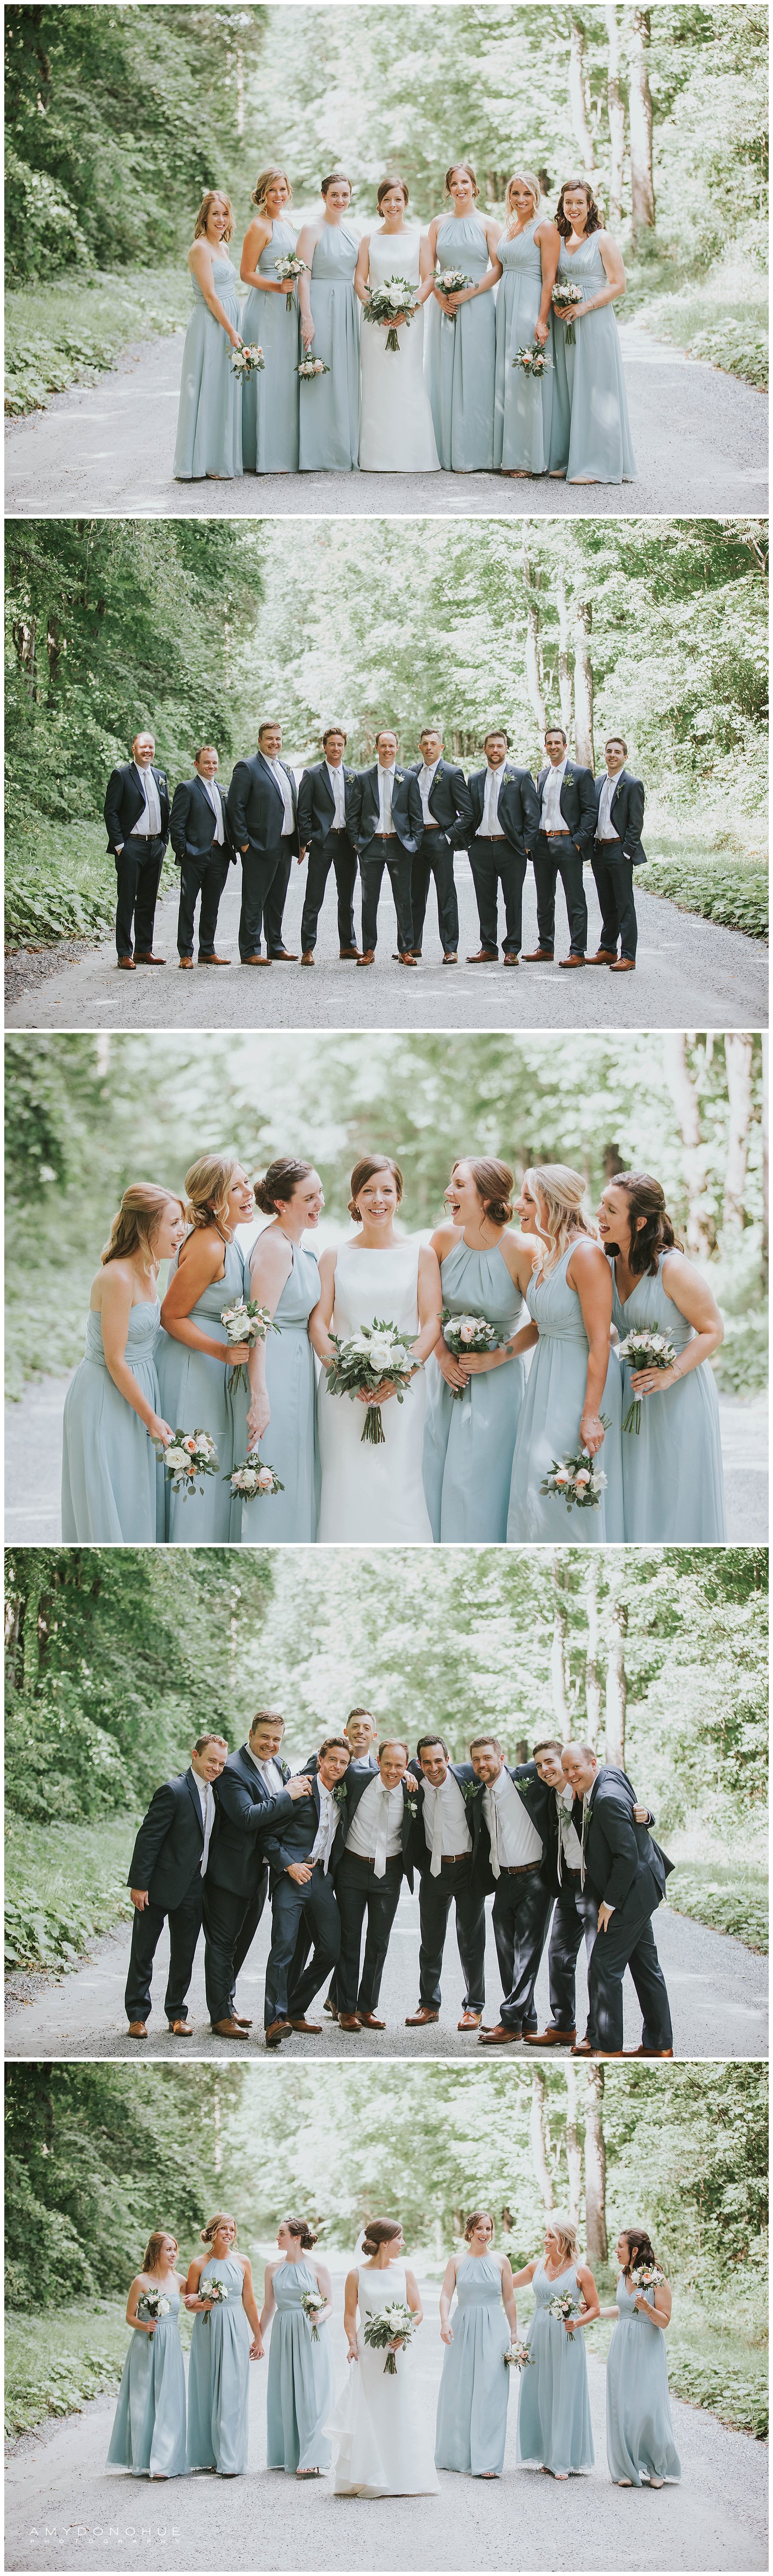 Bridal Party Portraits | © Amy Donohue Photography | Manchester Vermont Wedding Photographer